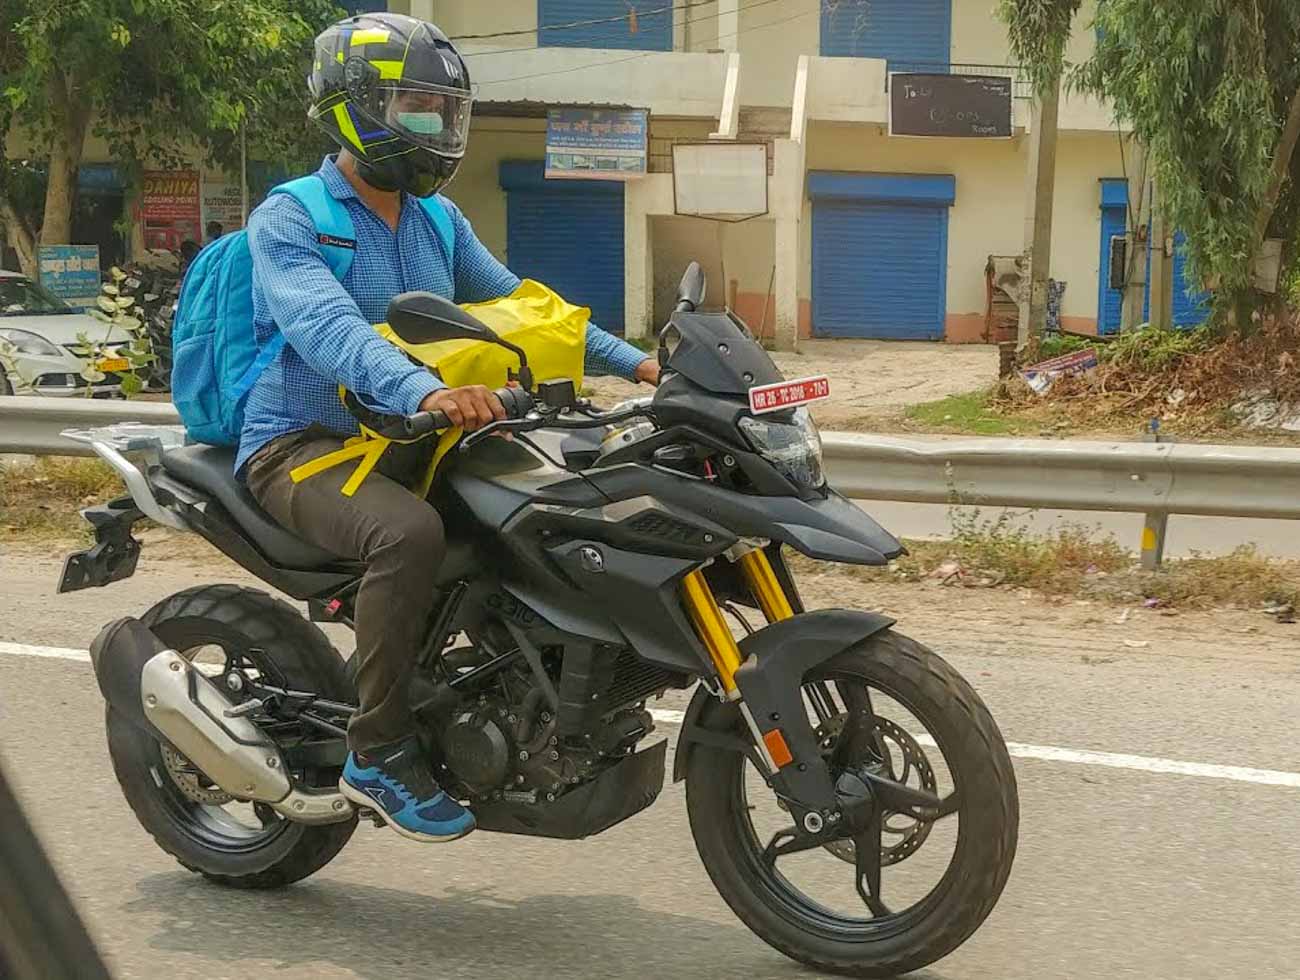 Bmw G310 Gs And G310r Bs6 Spotted Testing In India